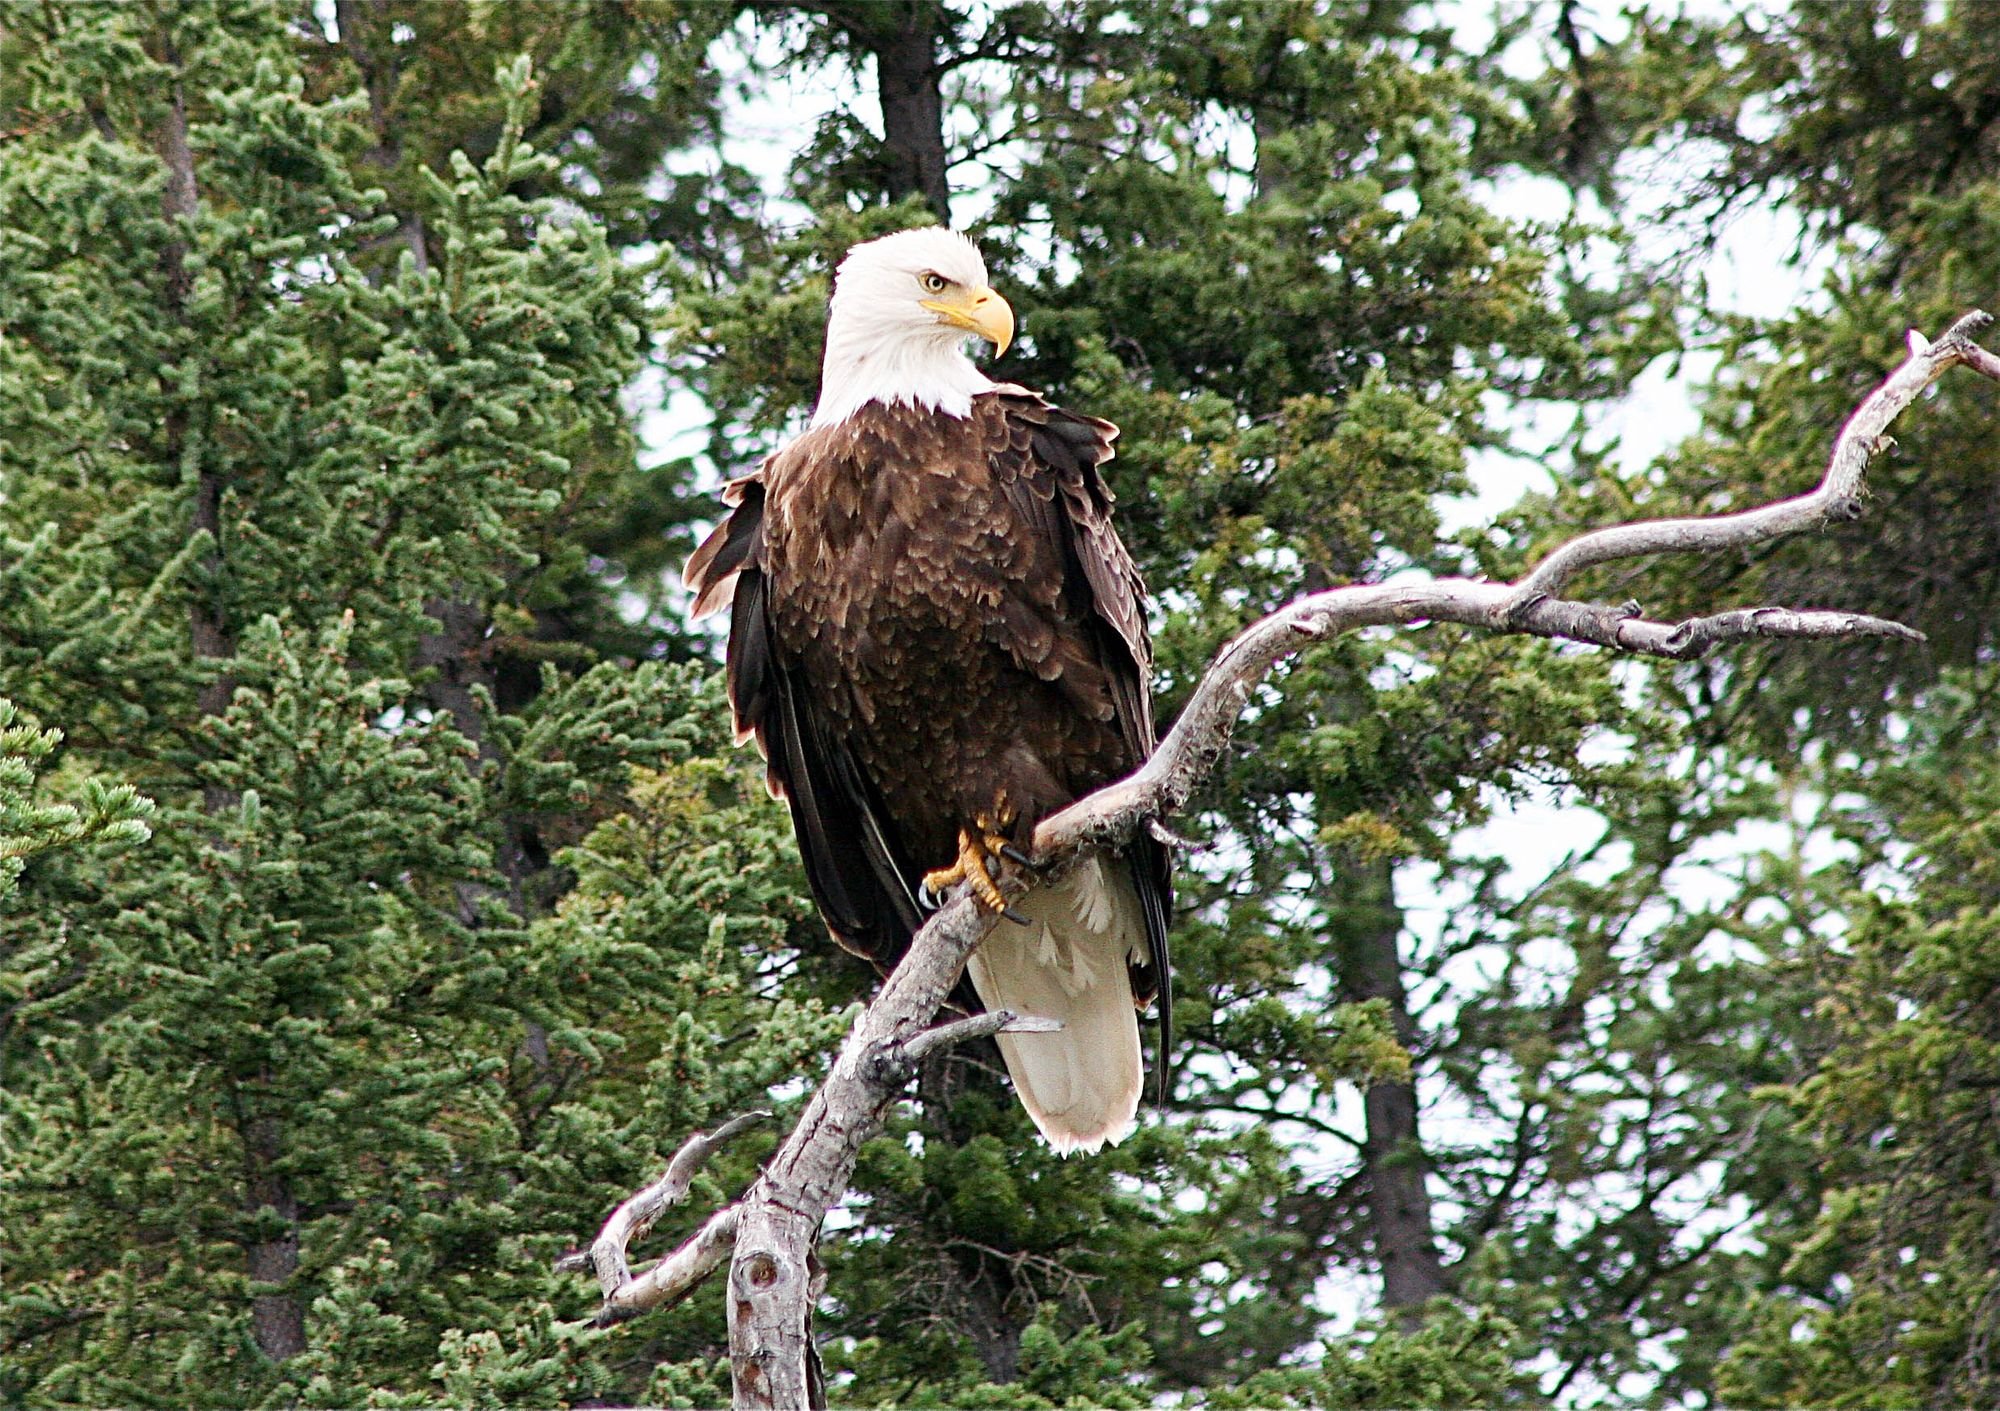 A bold eagle in a spruce tree.